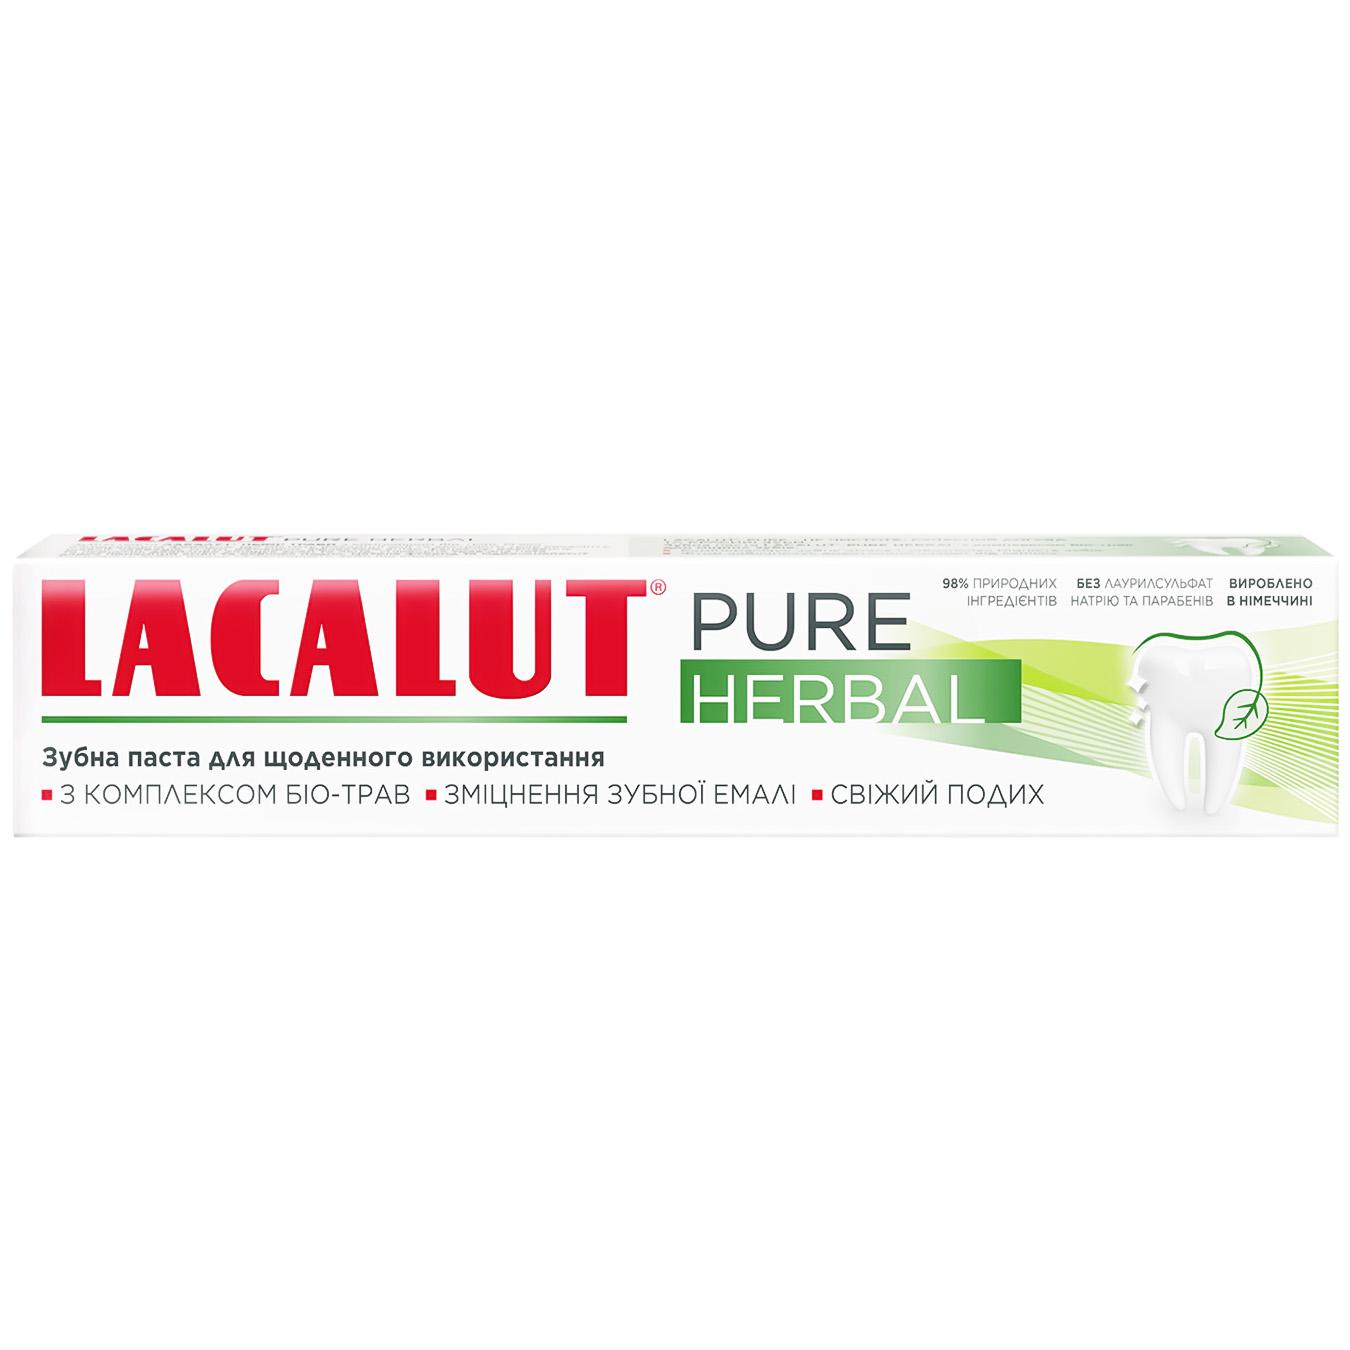 Lacalut pure herbal toothpaste for strengthening teeth 75 ml